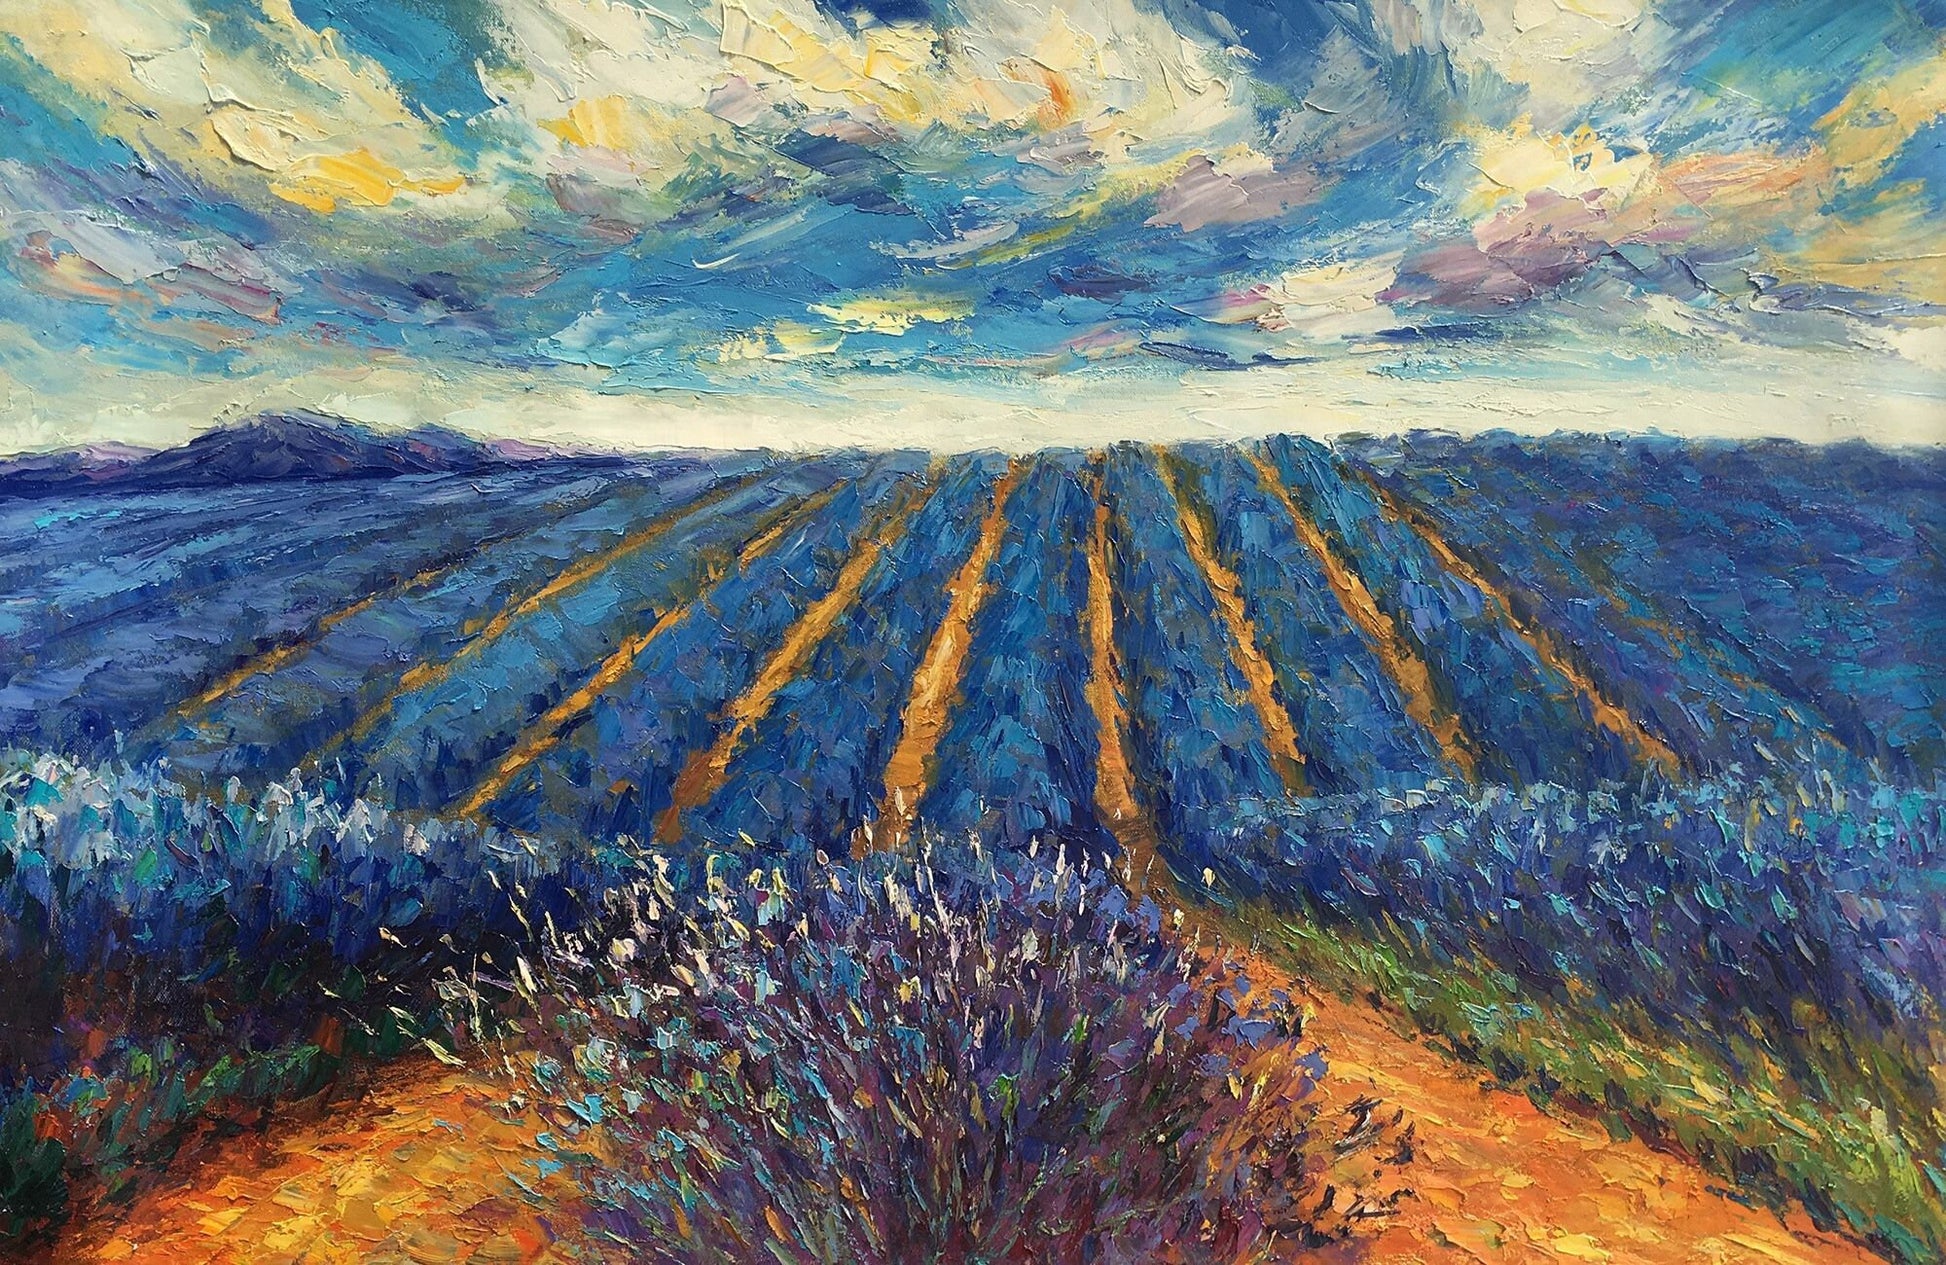 Landscape Oil Painting French Provence Lavender Fields, Canvas Art, Oil On Canvas Painting, Landscape Wall Art, Large Art, Contemporary Art